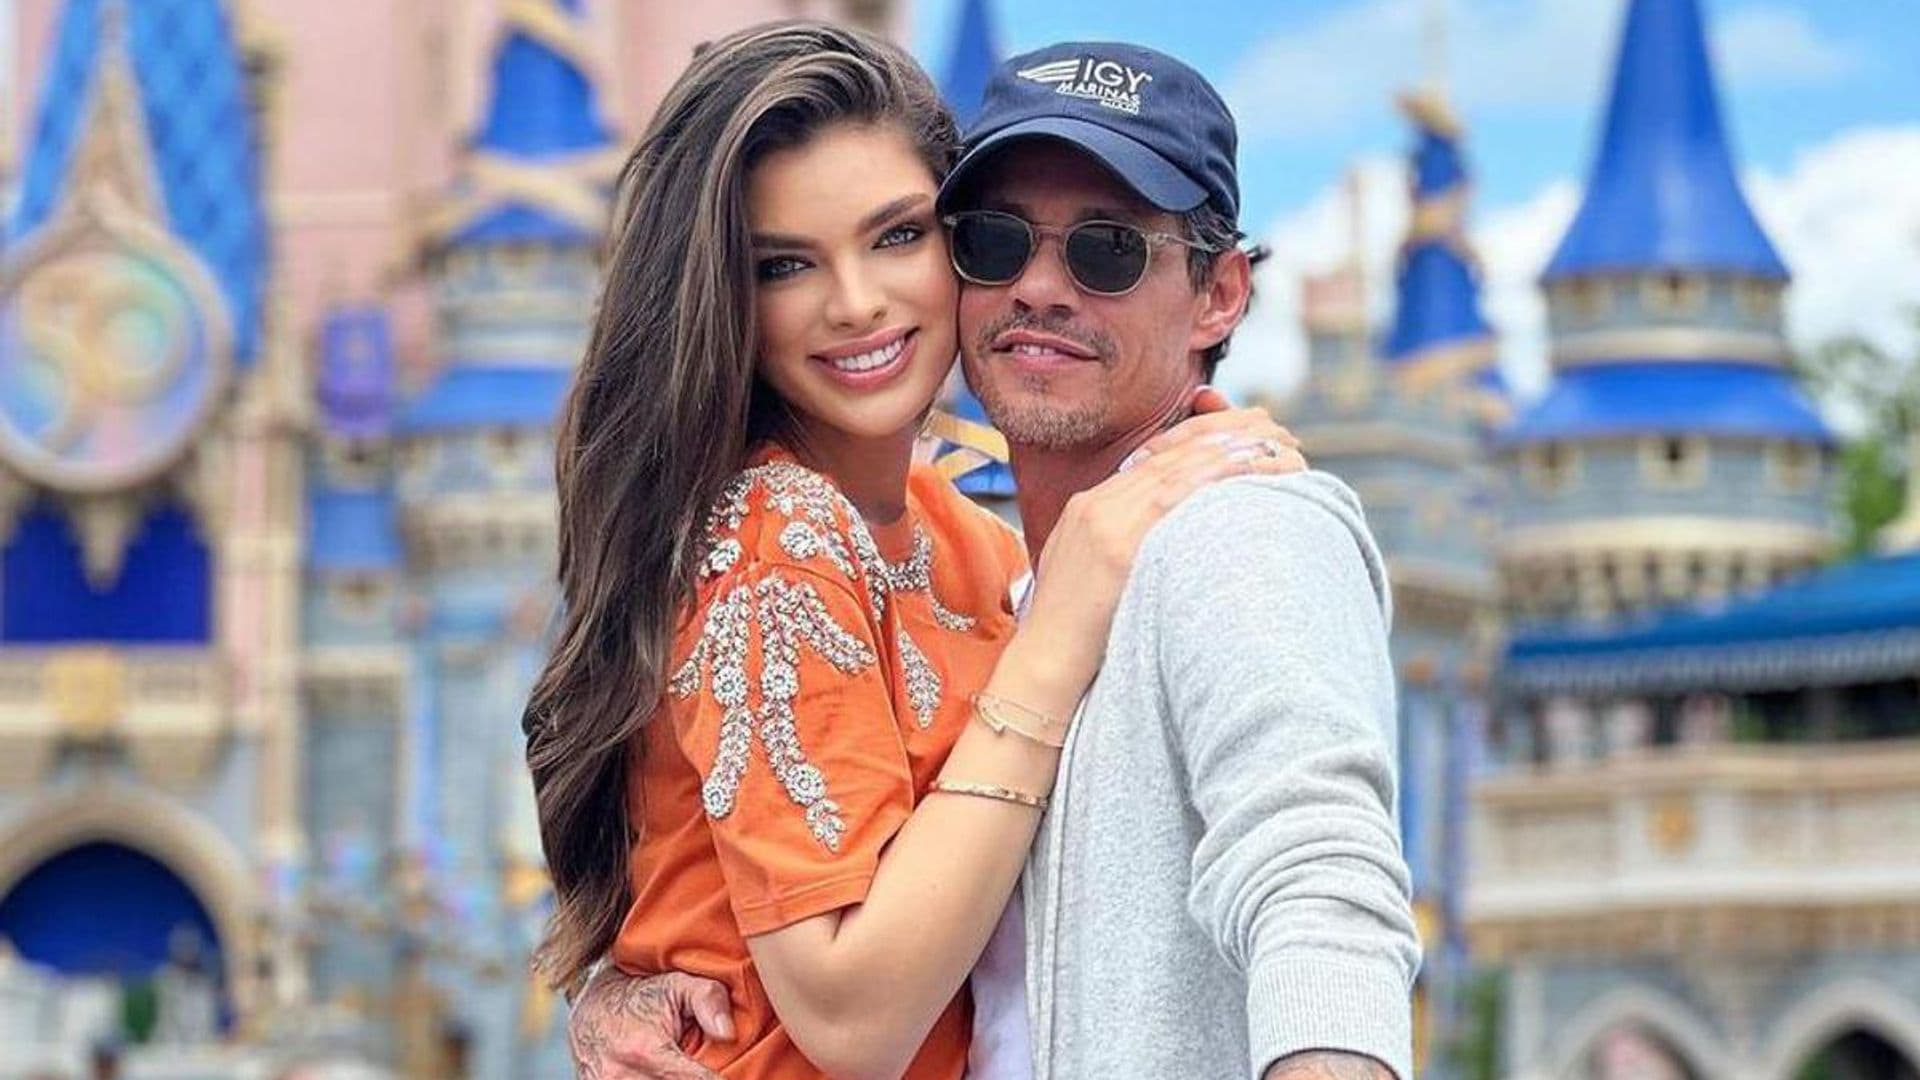 Marc Anthony and Nadia Ferreira are engaged! See here the impressive diamond ring